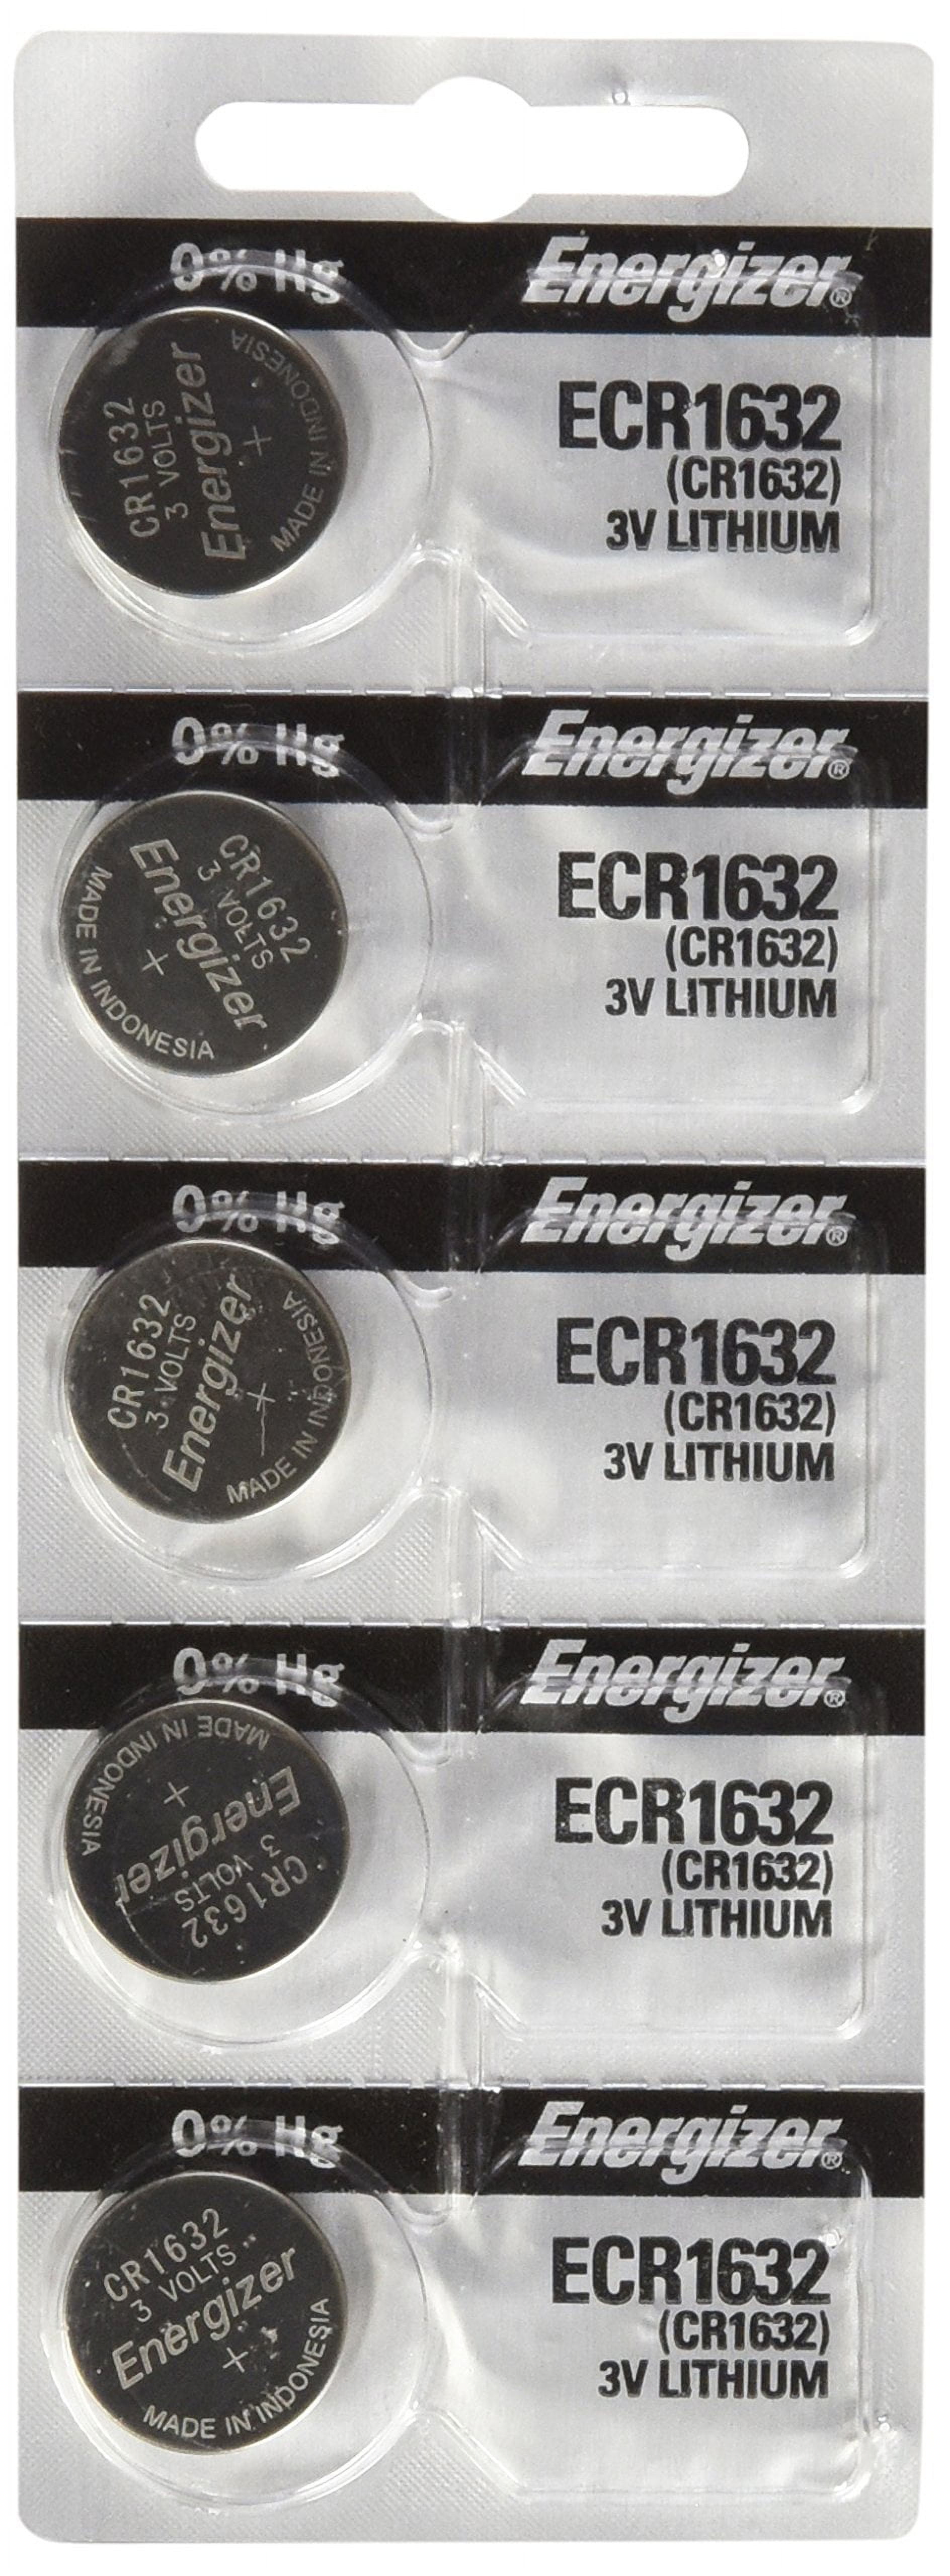 Energizer CR1632 3 Volt Lithium Coin Battery 10 Pack (2 packs of 5 ...